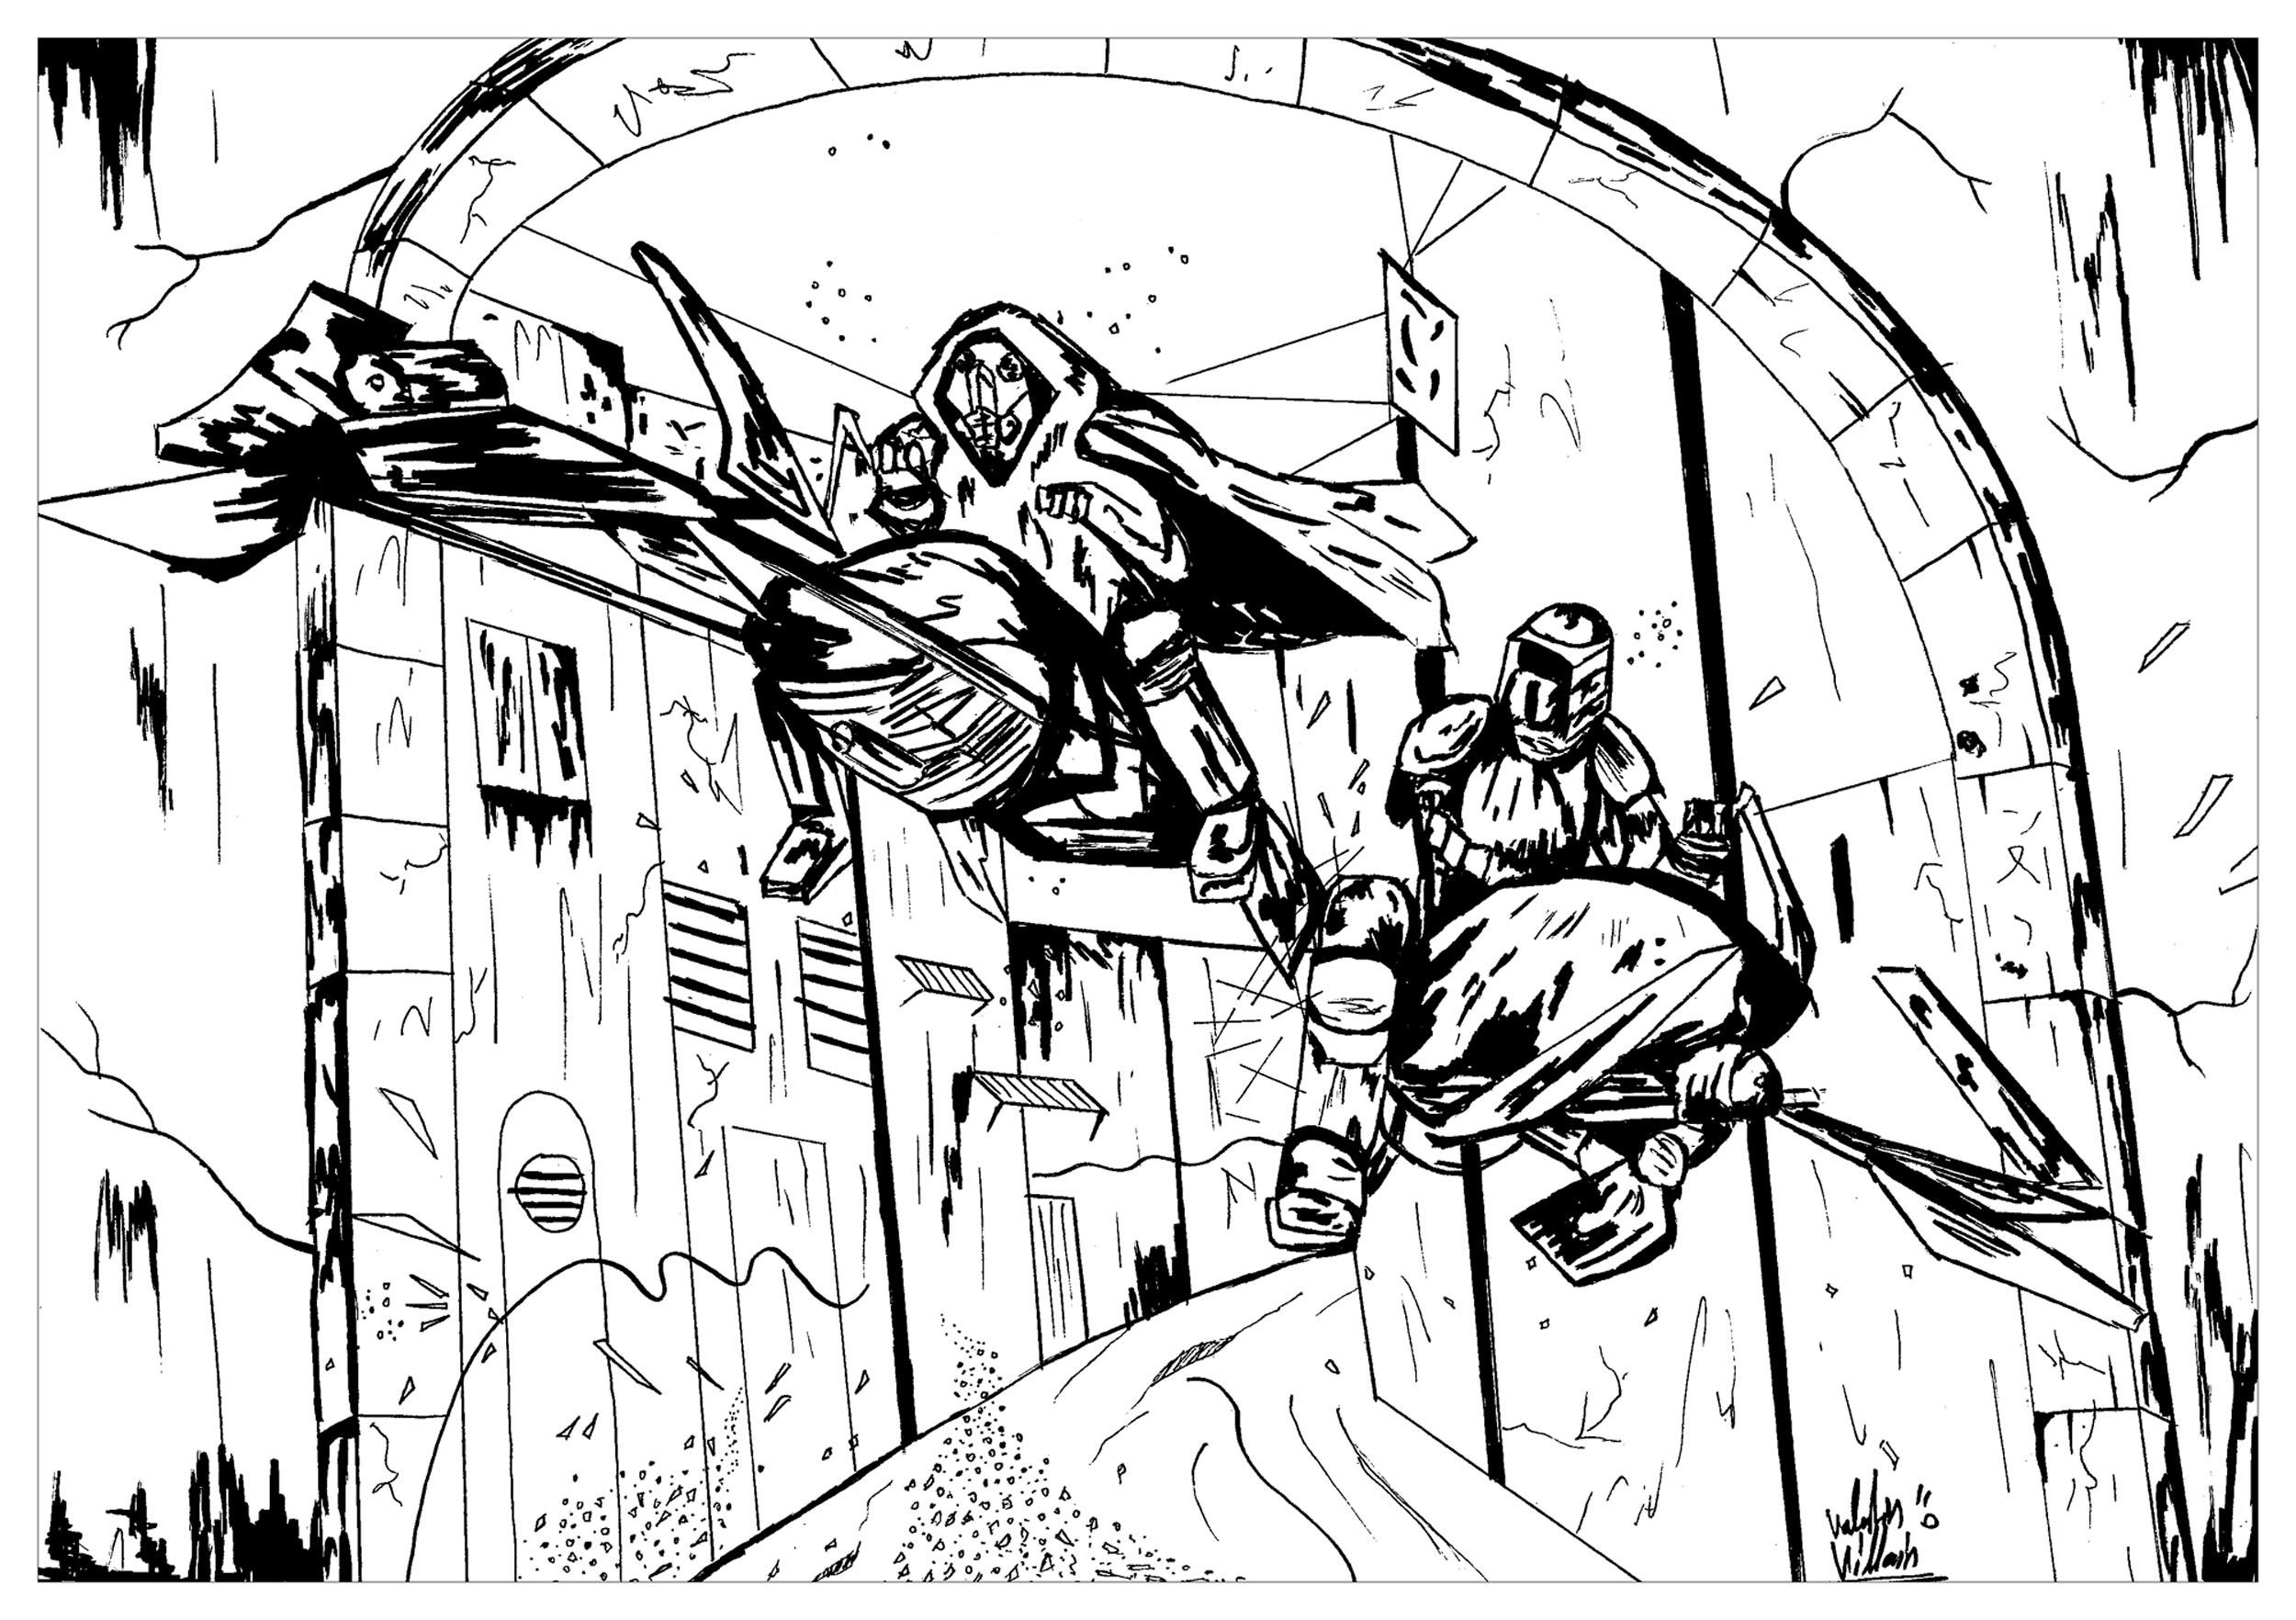 Coloring page of a chase scene inspired by Star Wars